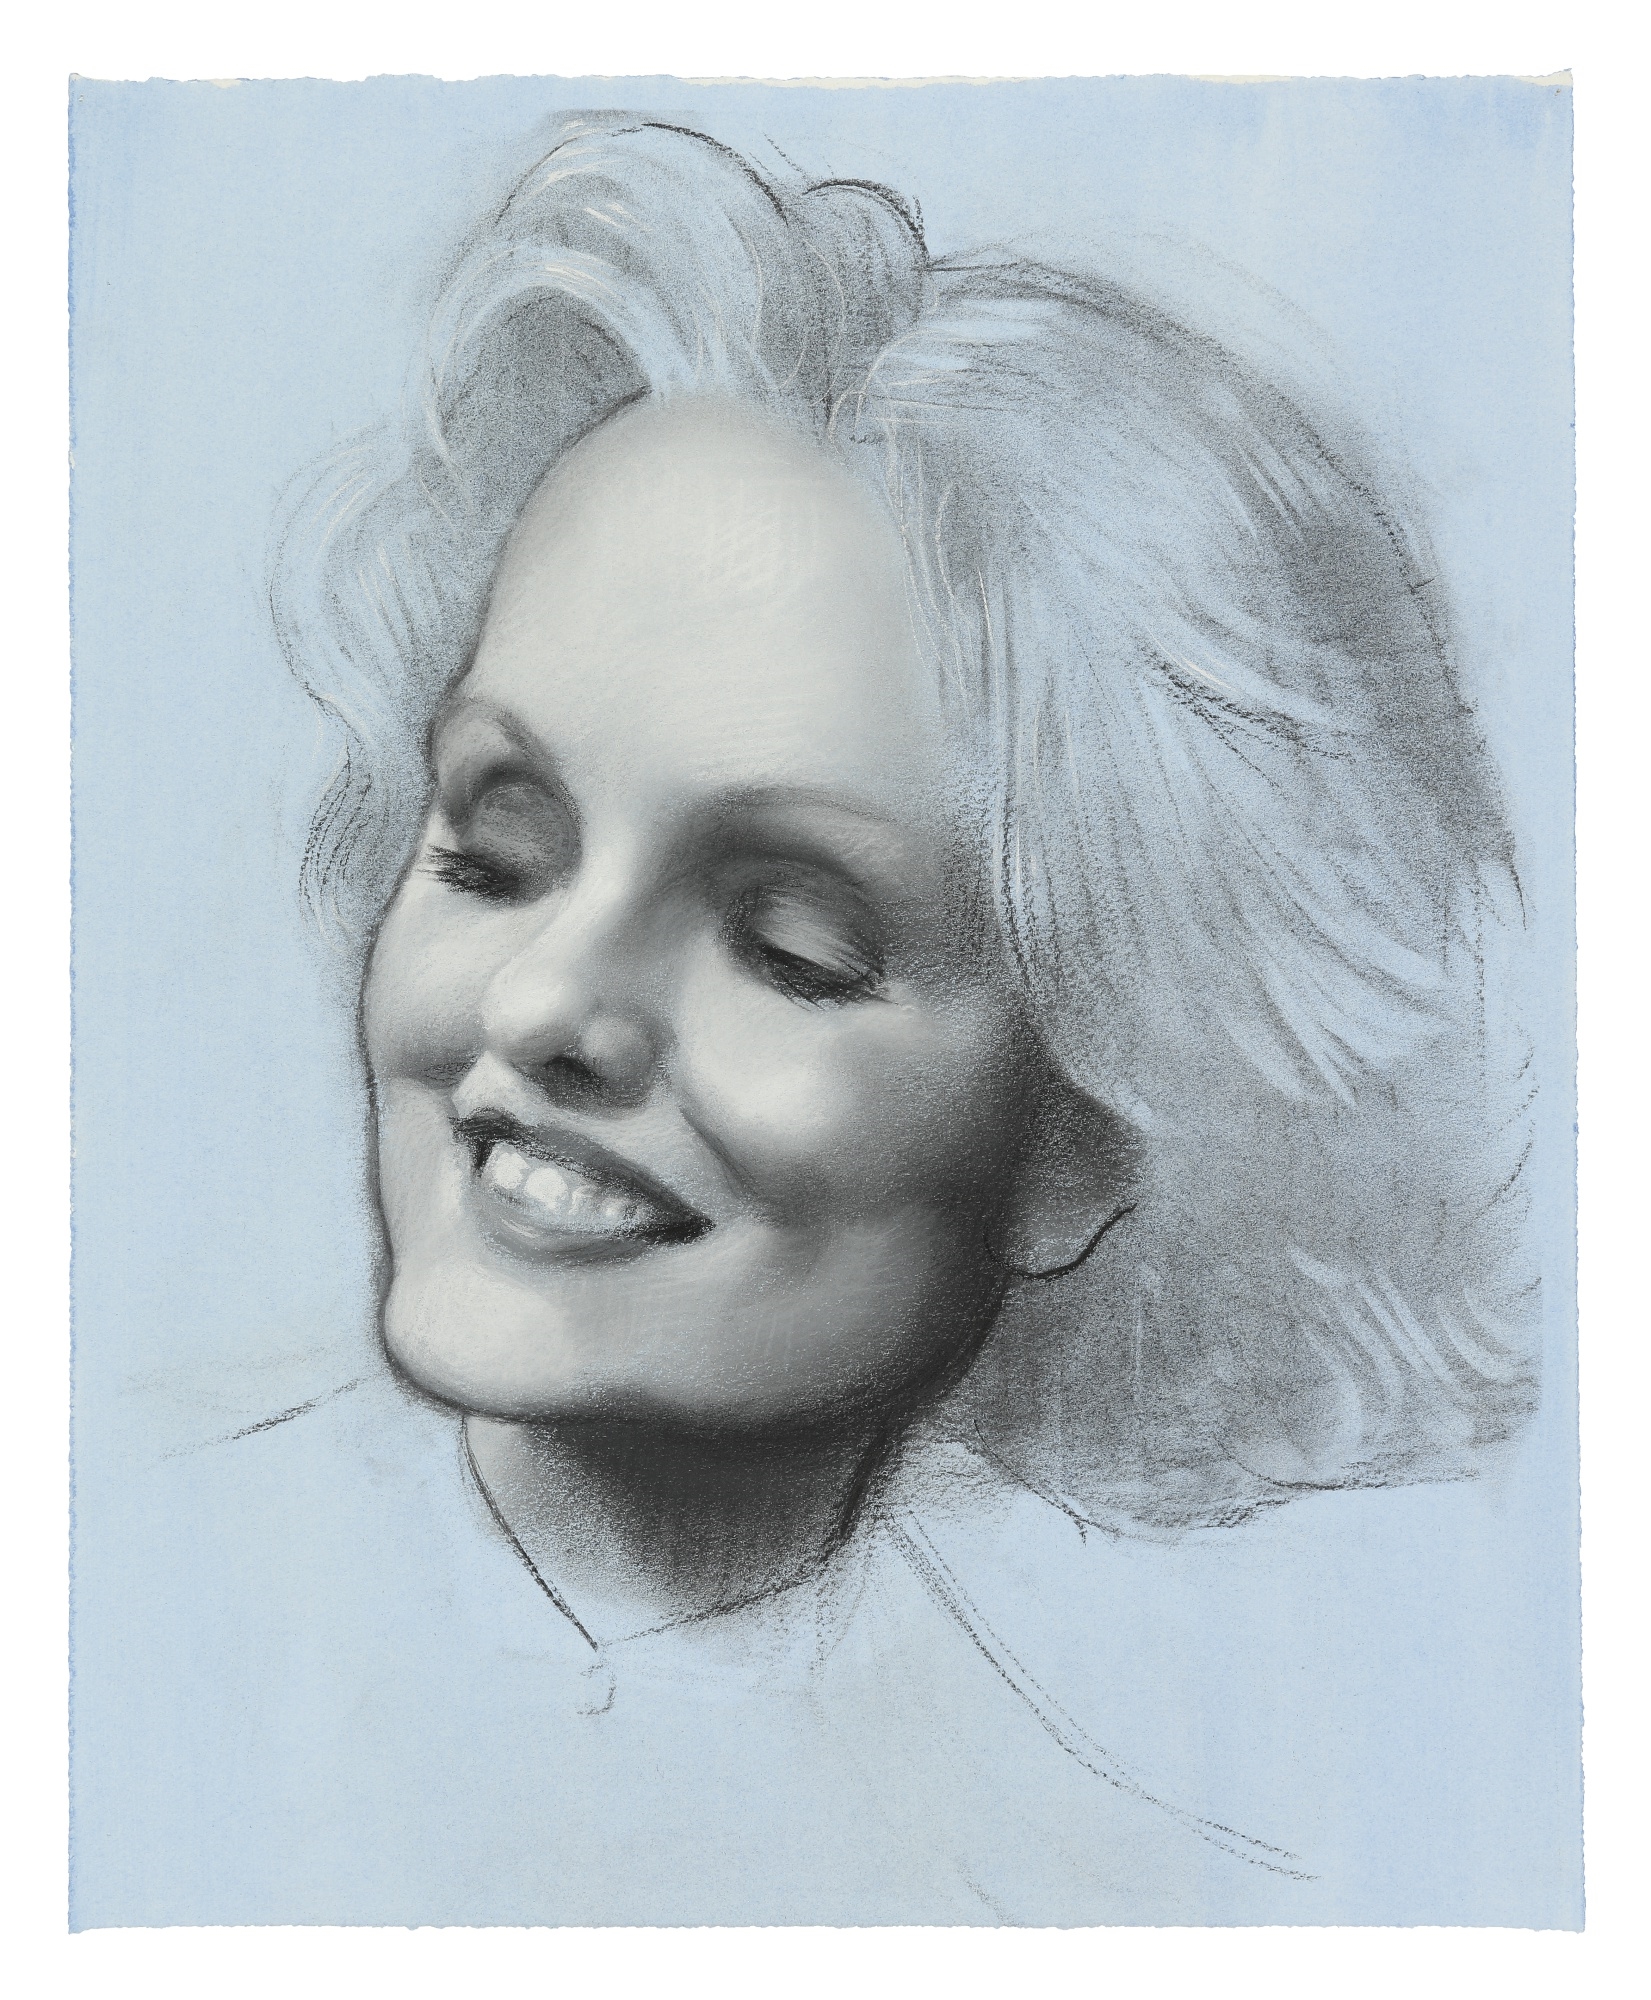 STUDY FOR BENT WOMAN by John Currin, 2003